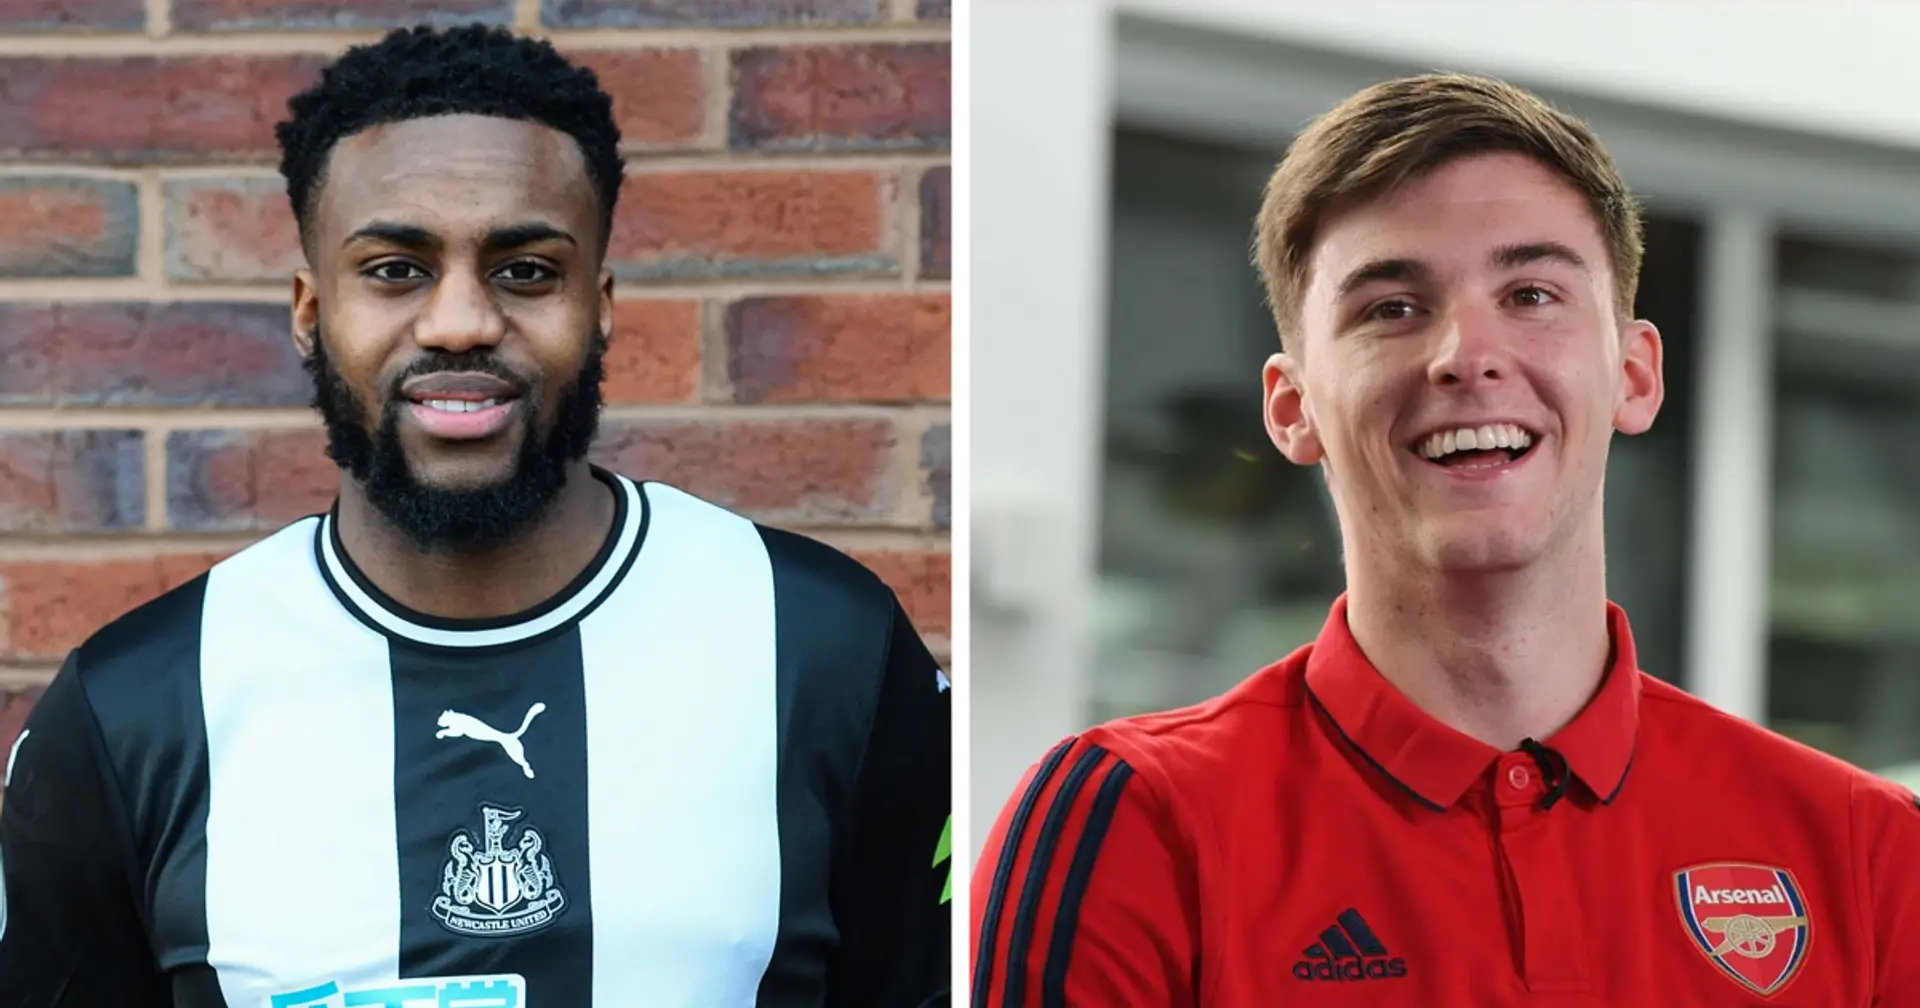 'As soon as Brendan Rodgers hailed Tierney, I took an interest in him': Danny Rose heaps praise on Arsenal defender